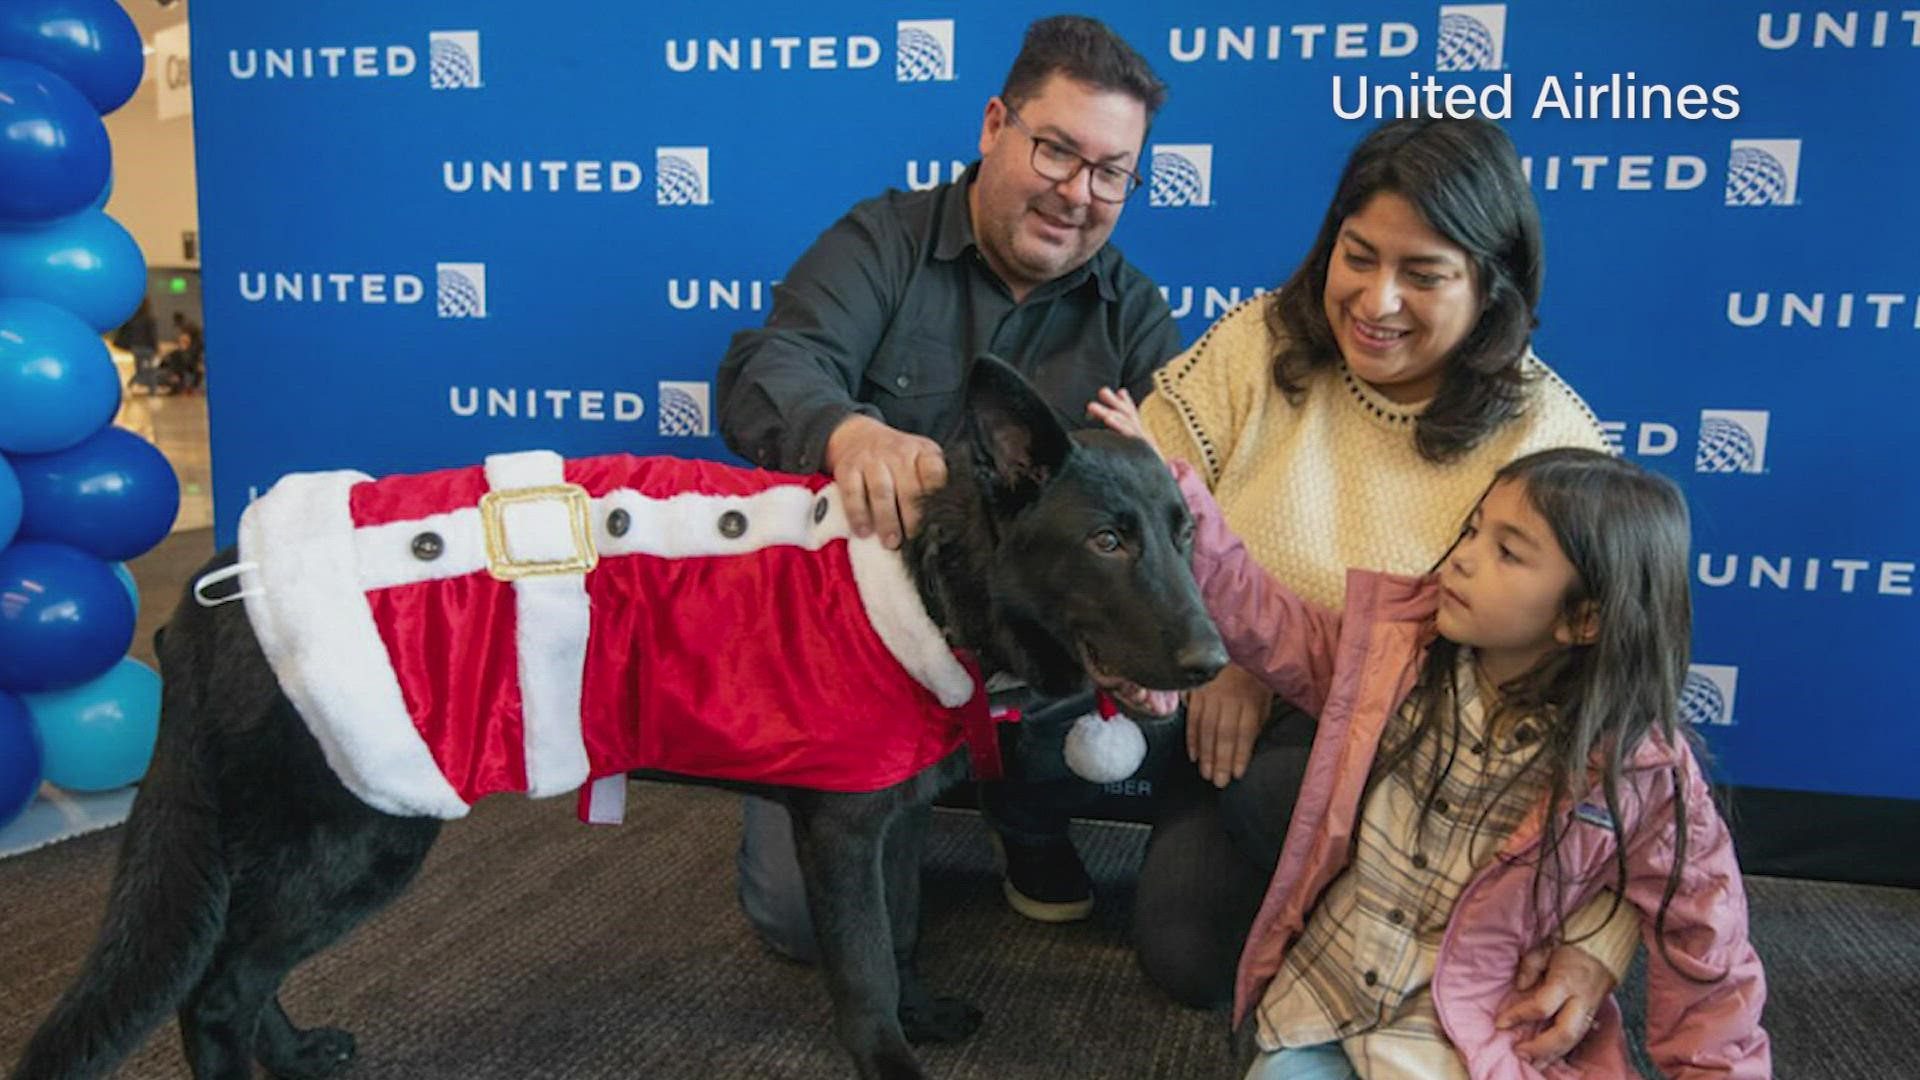 The dog, named Polaris, was left at the San Francisco Airport by an international traveler who decided to continue traveling without it.